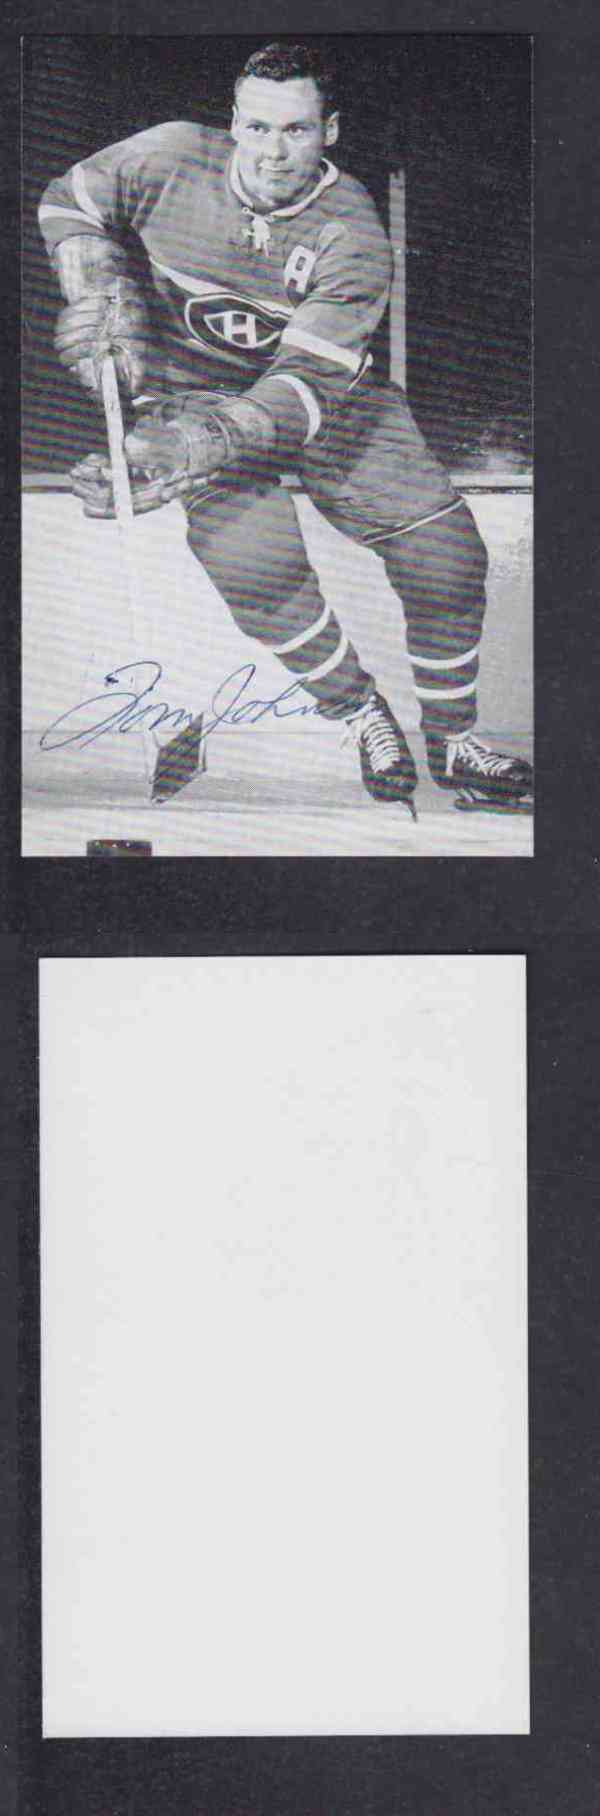 1960 'S MONTREAL CANADIENS T.JOHNSON  AUTOGRAPHED POST CARD  photo